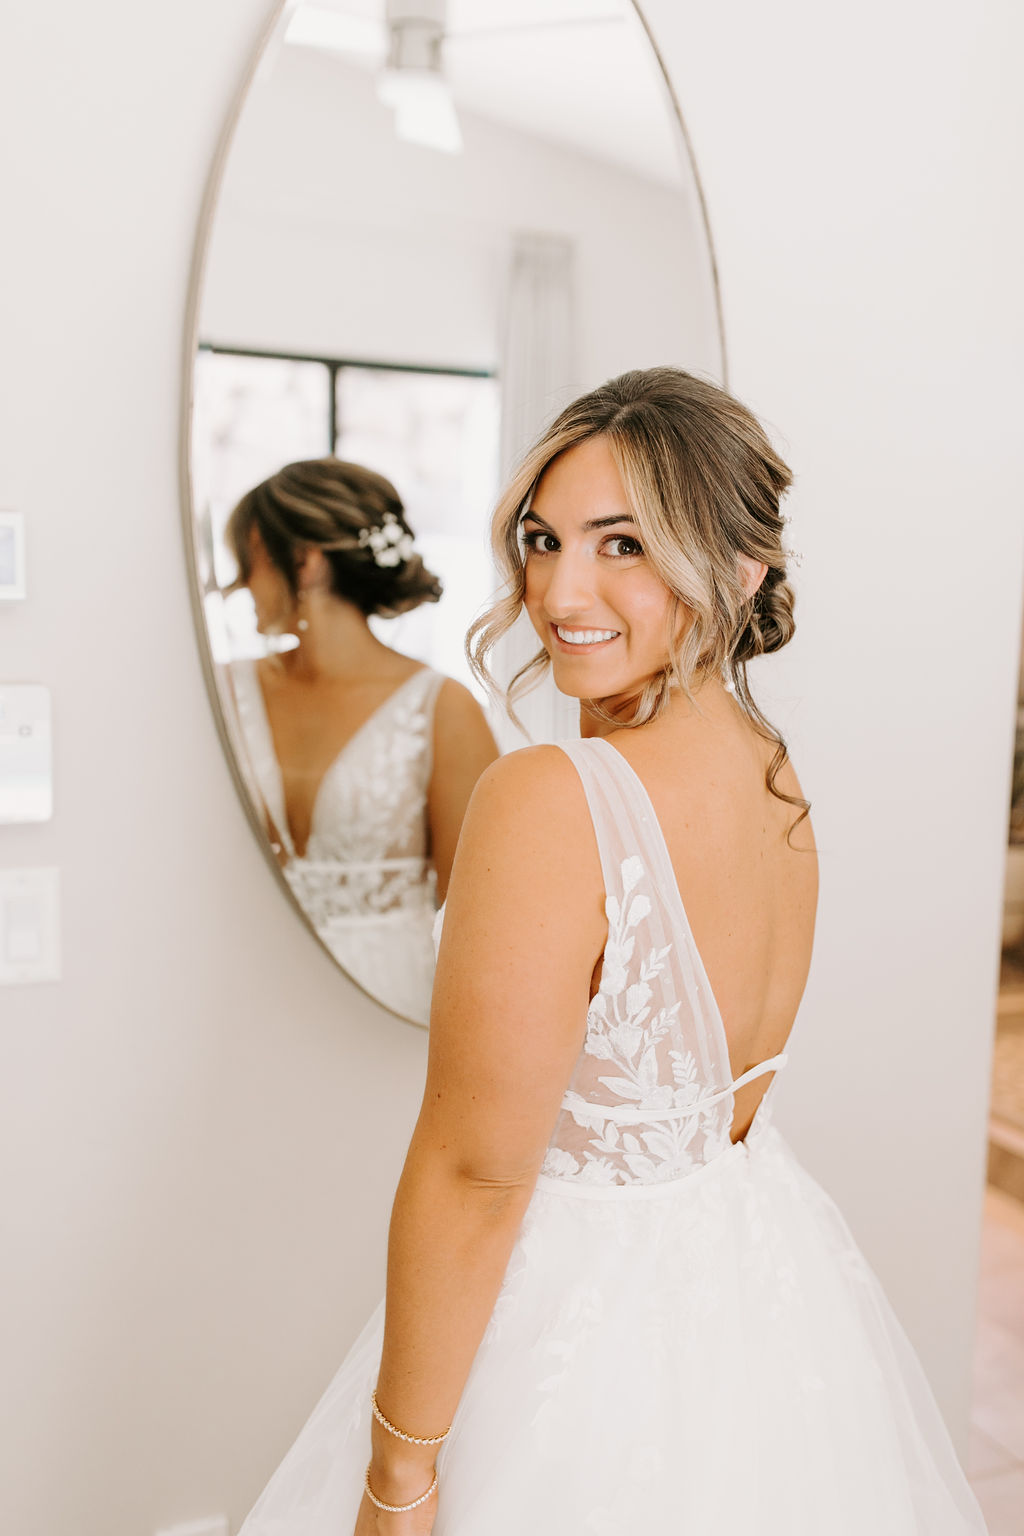 Bride smiling next to mirror while getting ready 